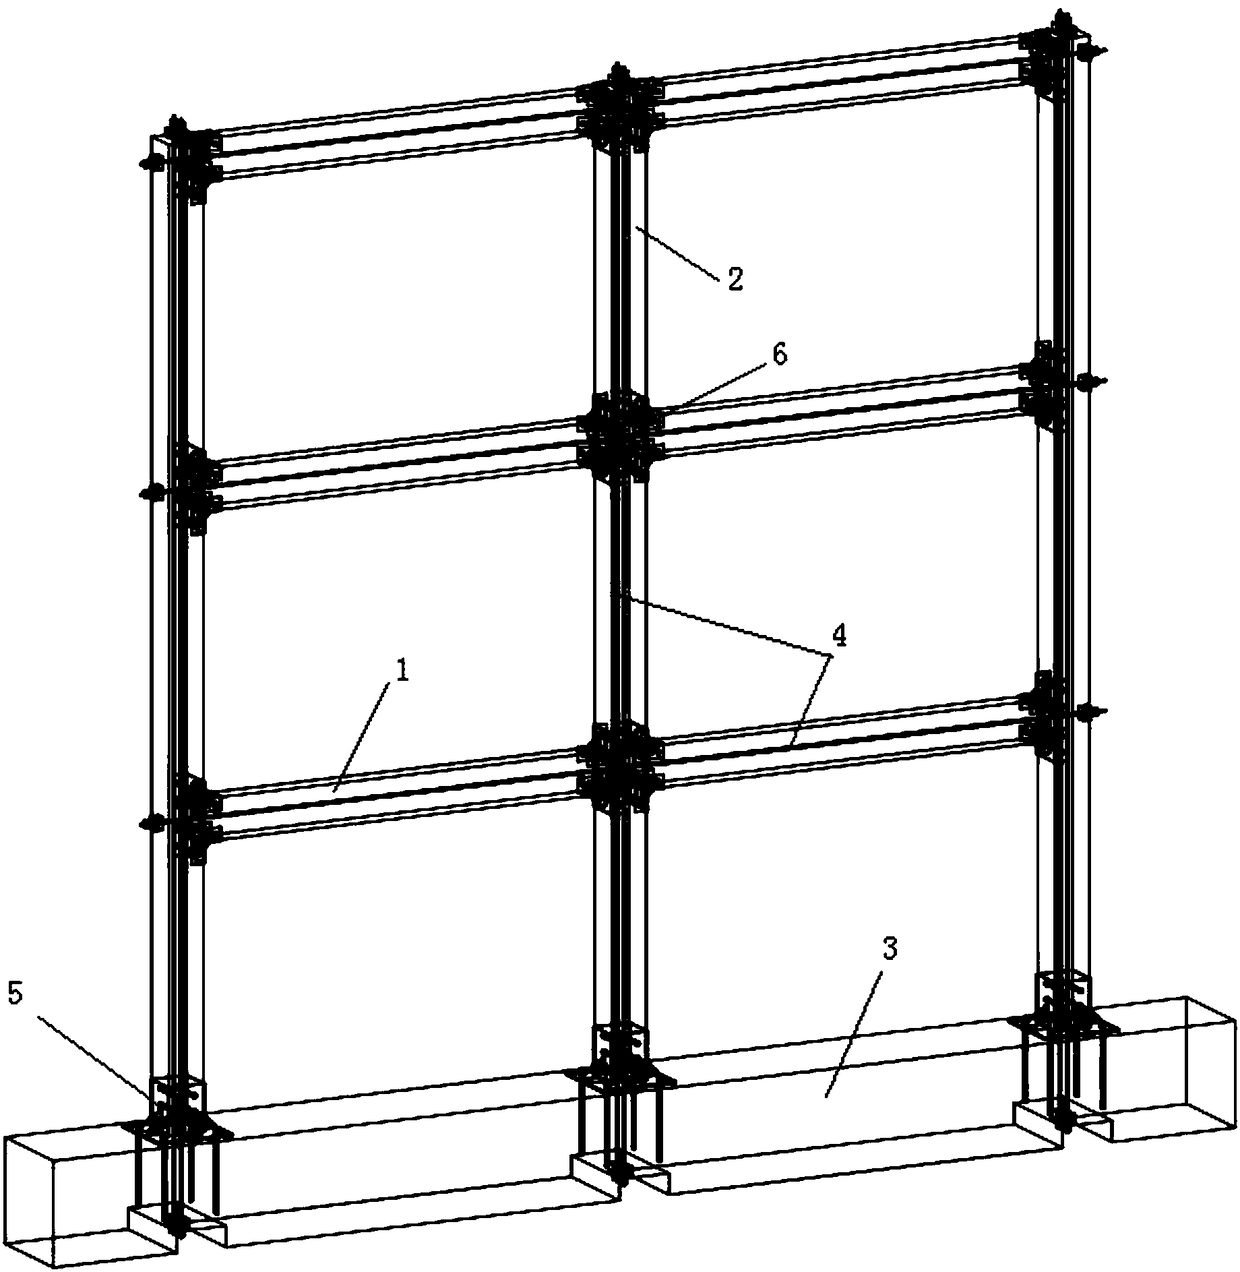 Self-resetting prestressed laminated wood frame structure